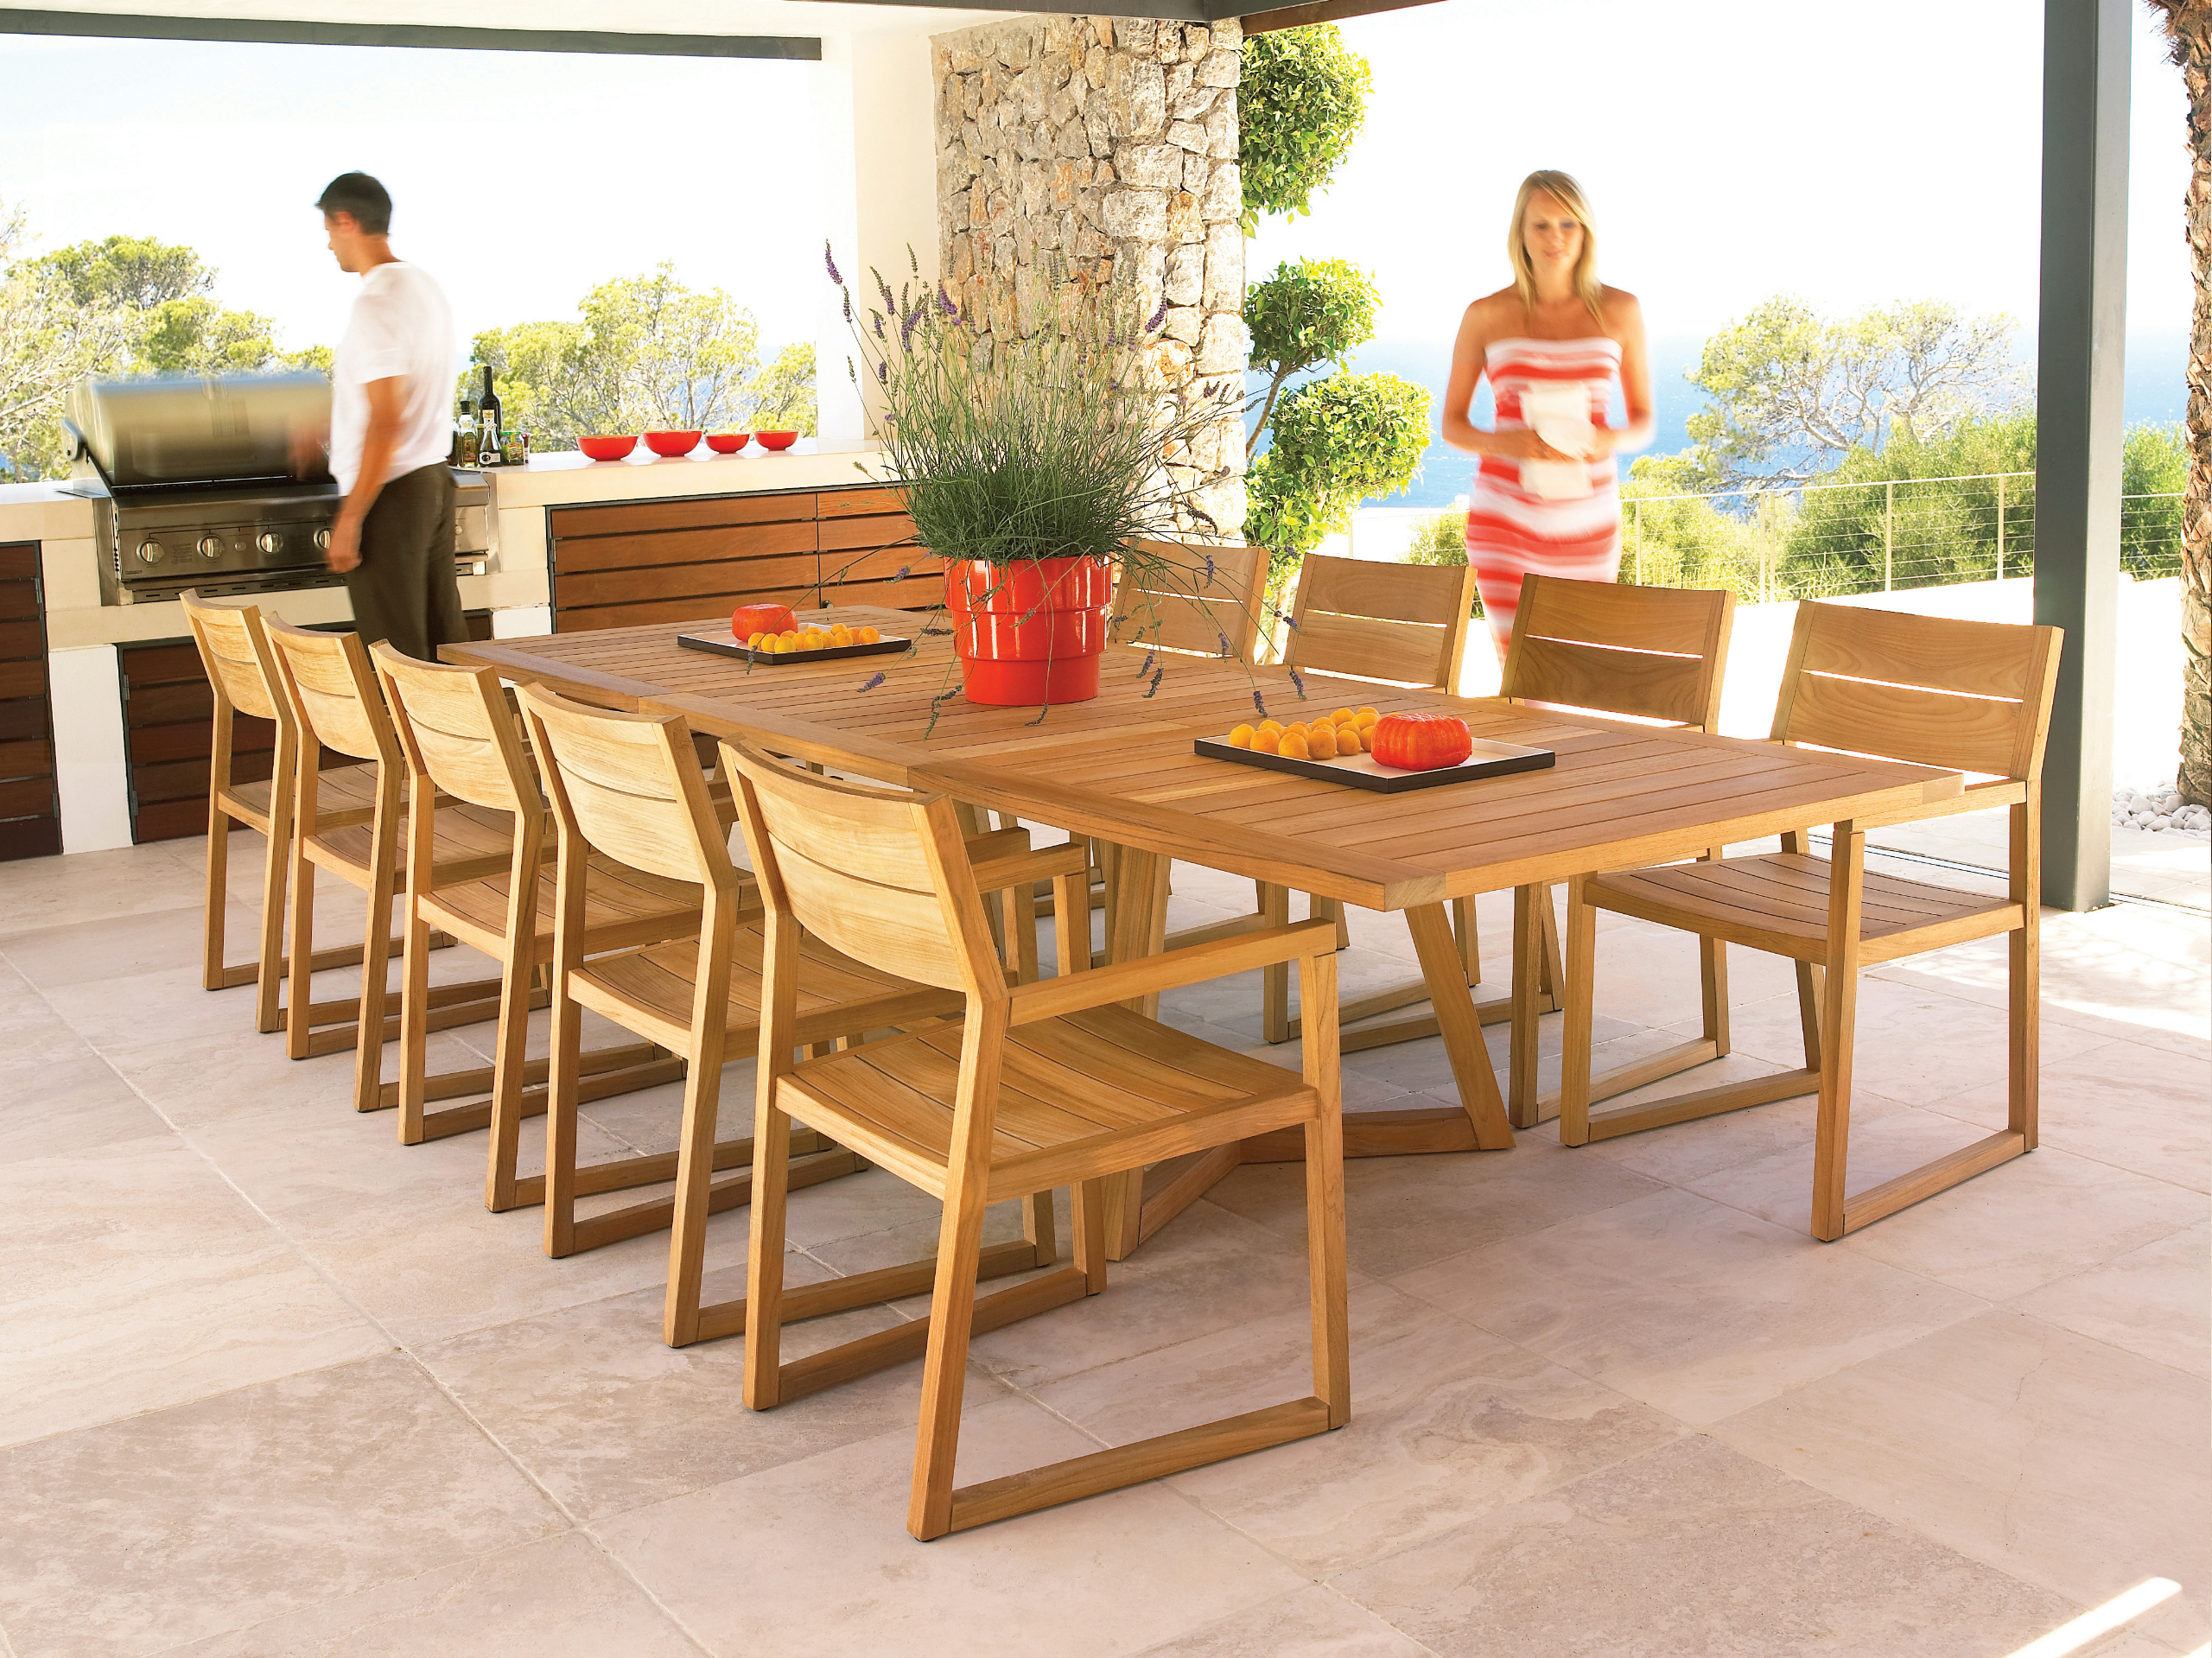 what's the difference between teak & ipe wood outdoor furniture?